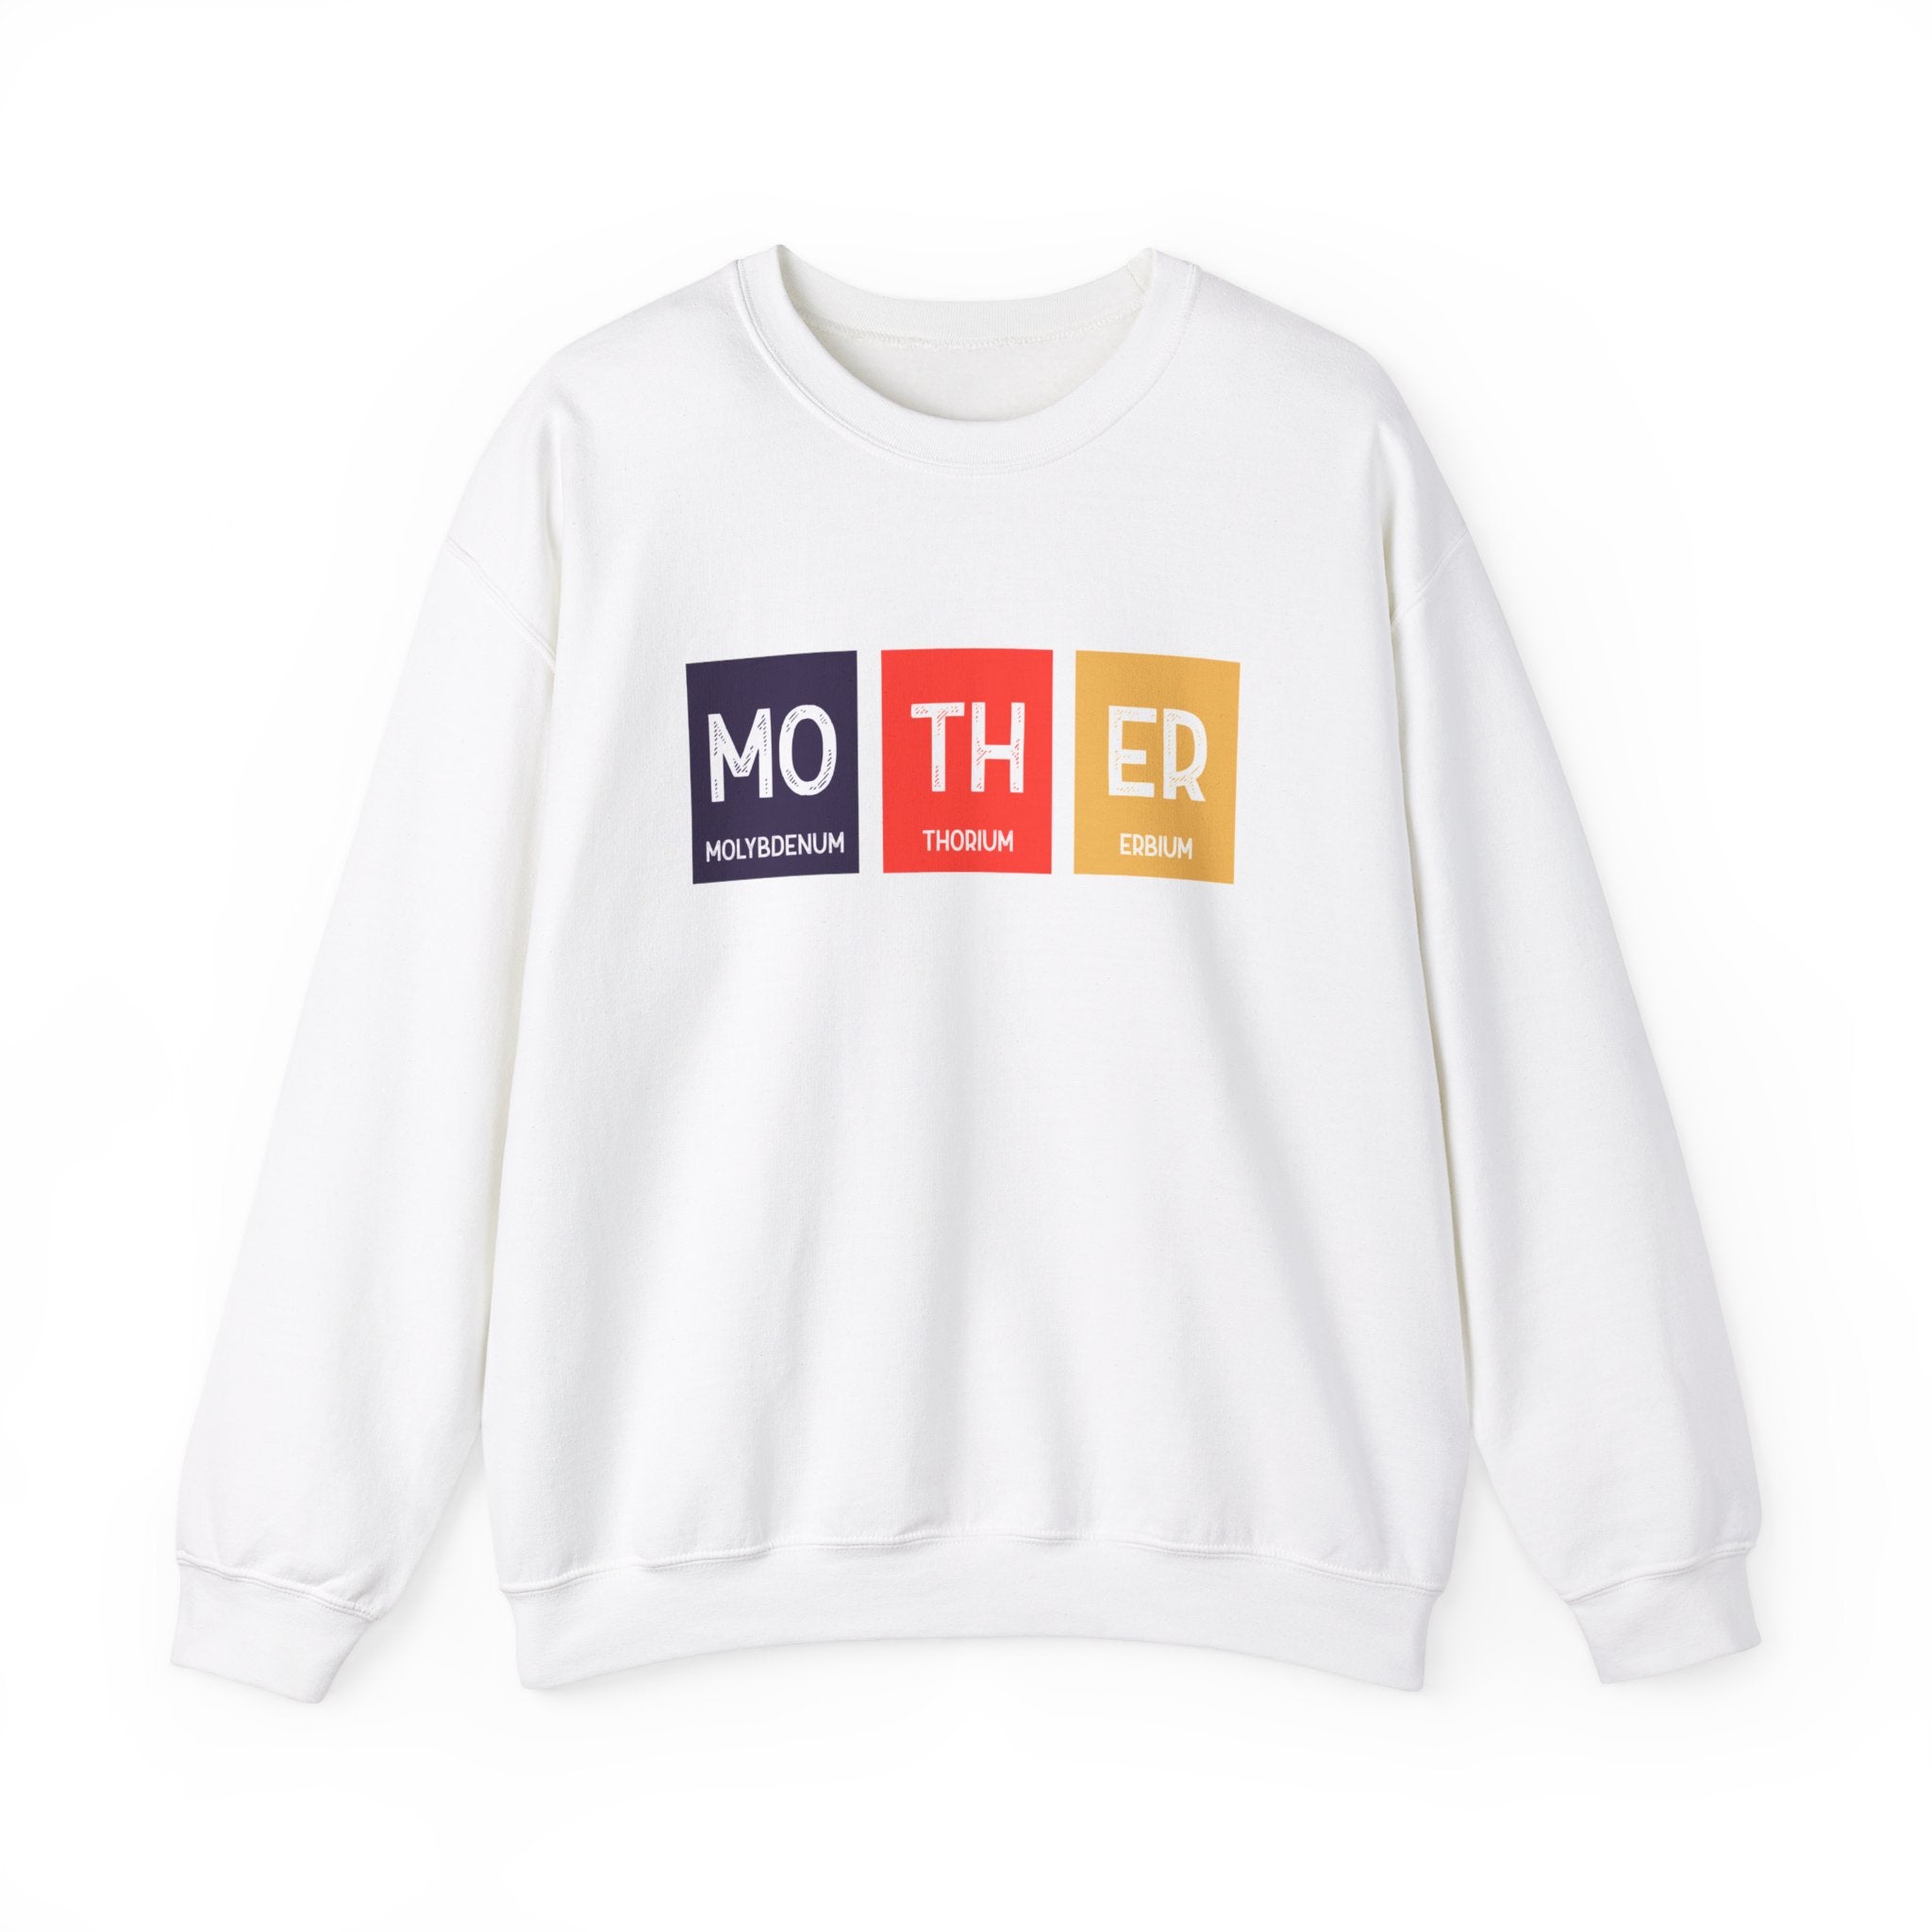 A cozy white Mo-TH-ER - Sweatshirt featuring a stylish design resembling the periodic table with the elements molybdenum (Mo), thorium (Th), and erbium (Er) highlighted to spell out "Mother.